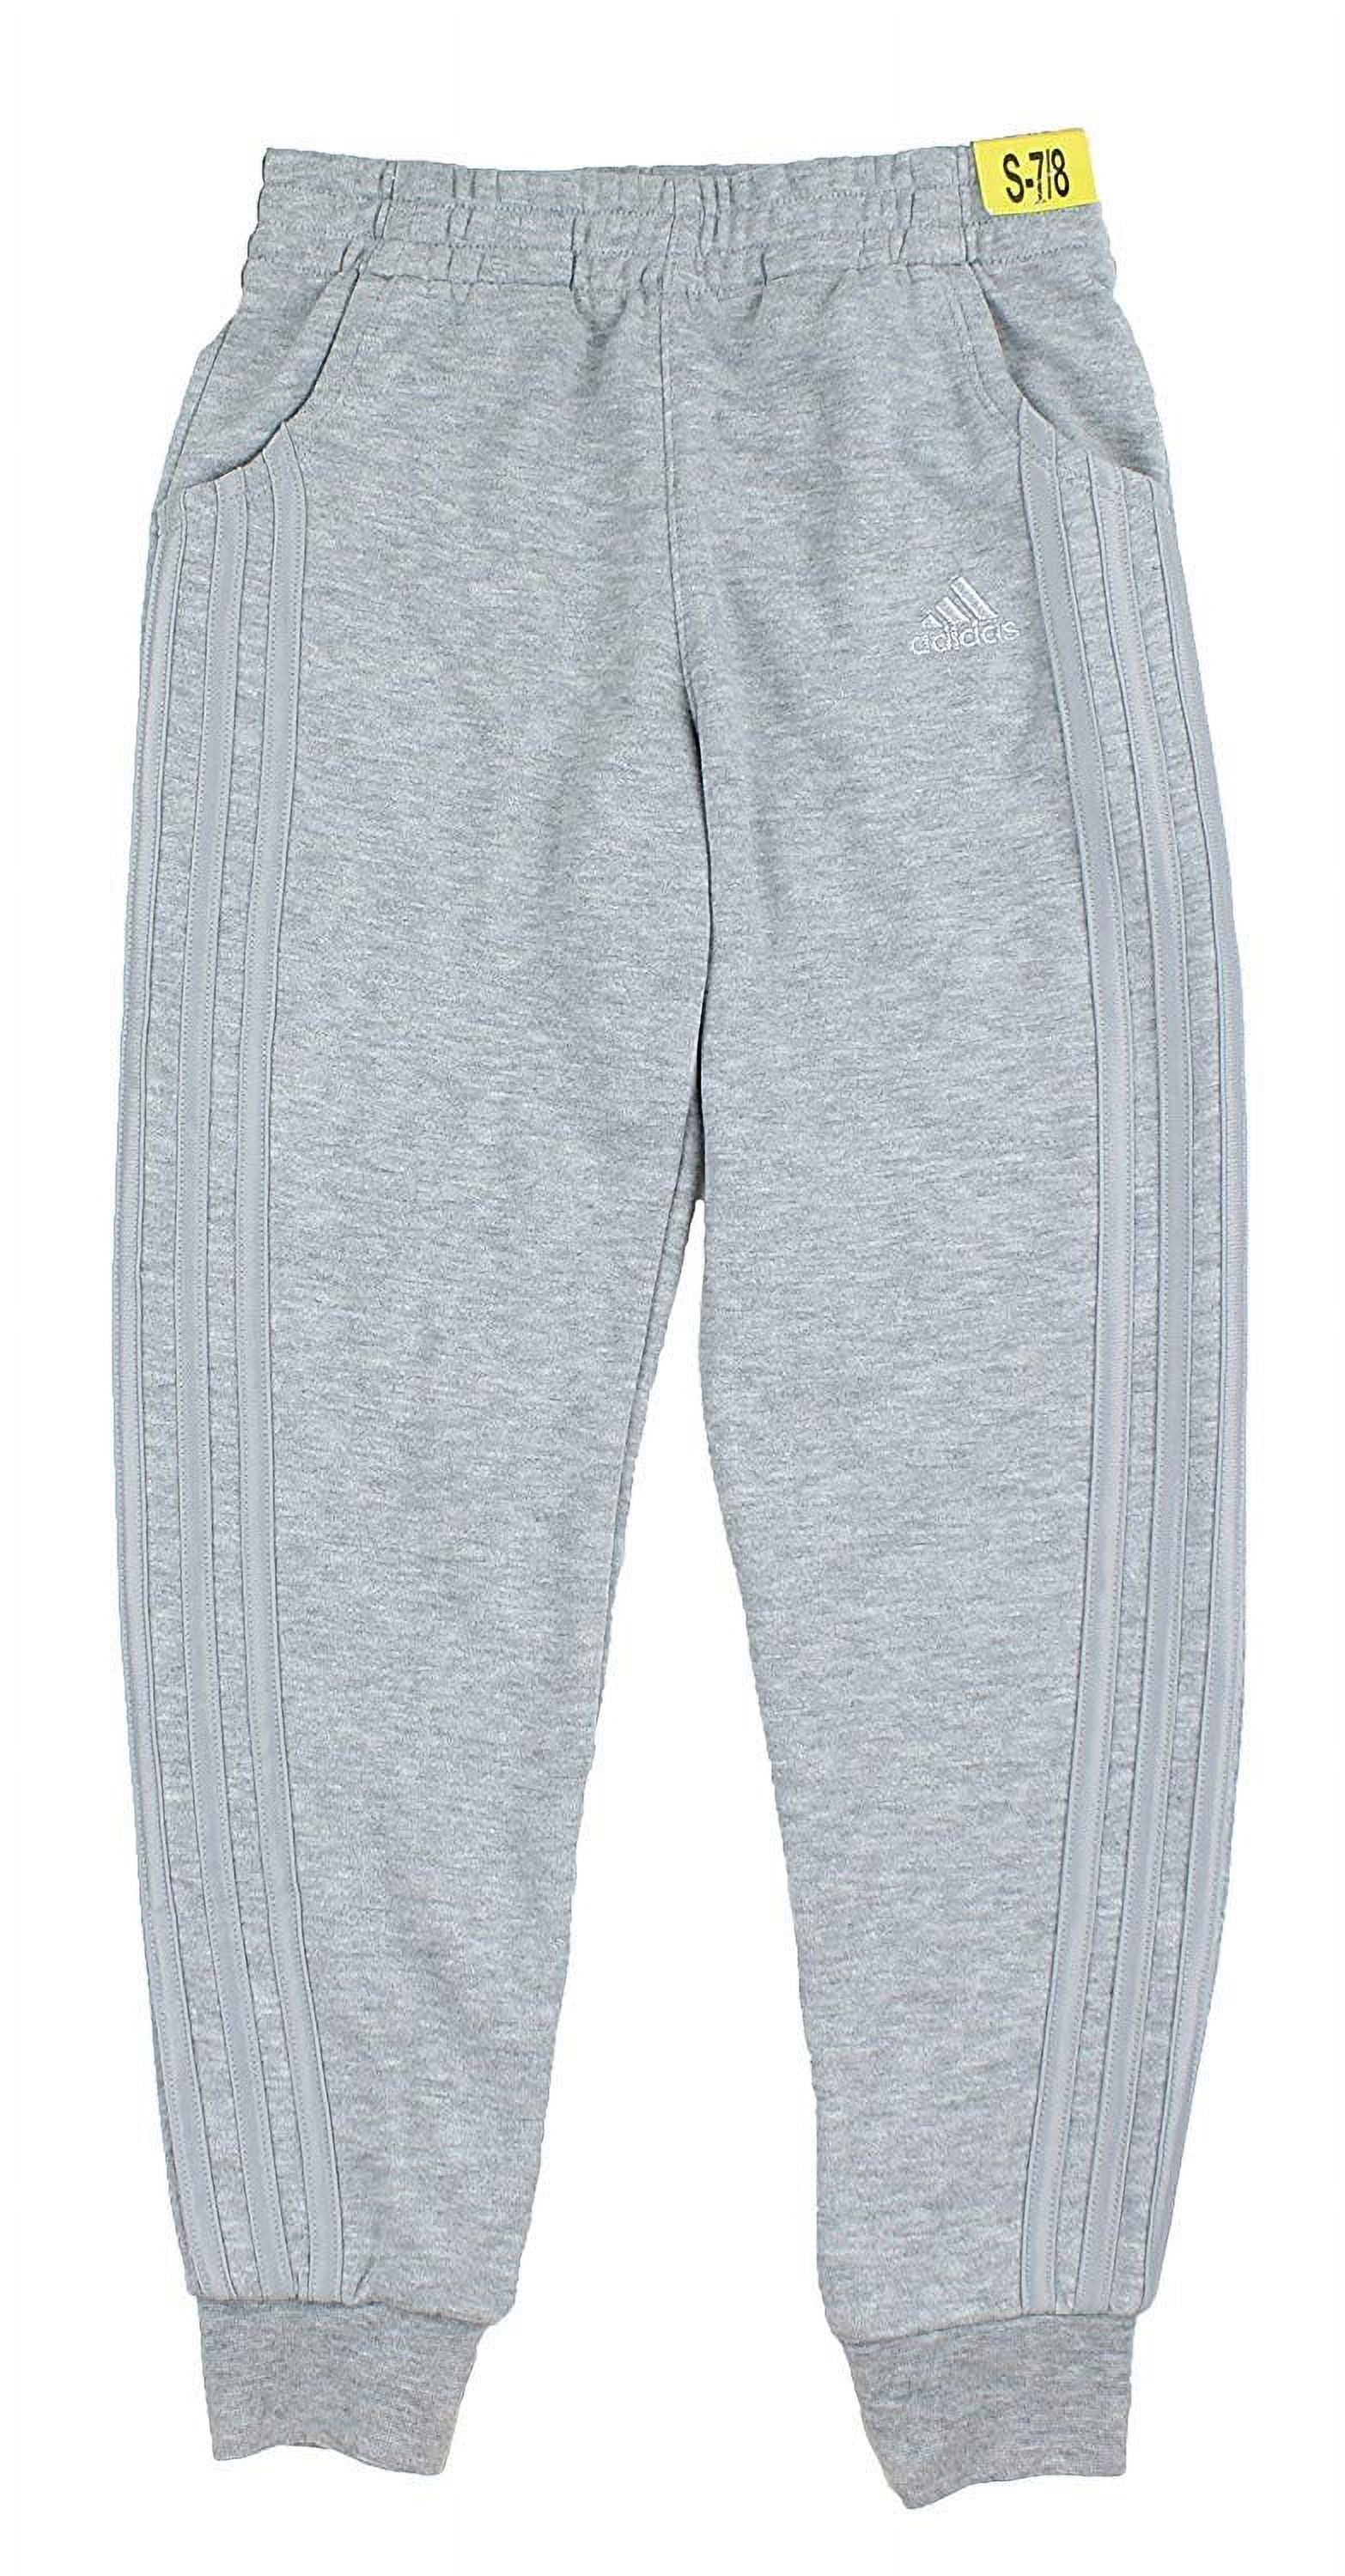 adidas Girls French Terry Pants Grey Heather, Small - image 1 of 2